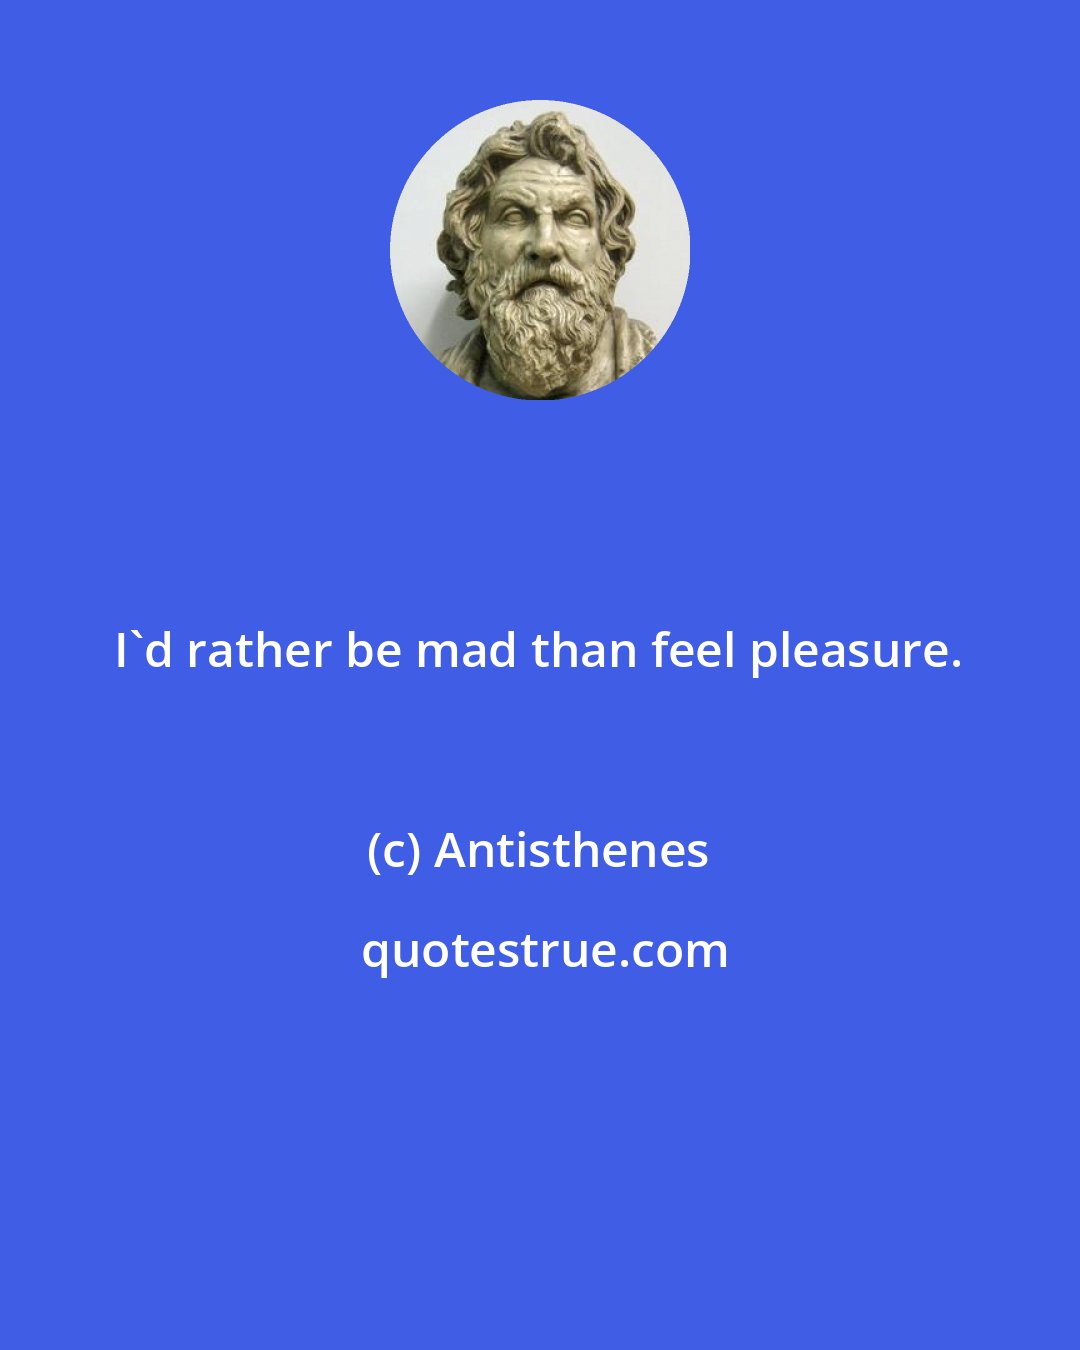 Antisthenes: I'd rather be mad than feel pleasure.